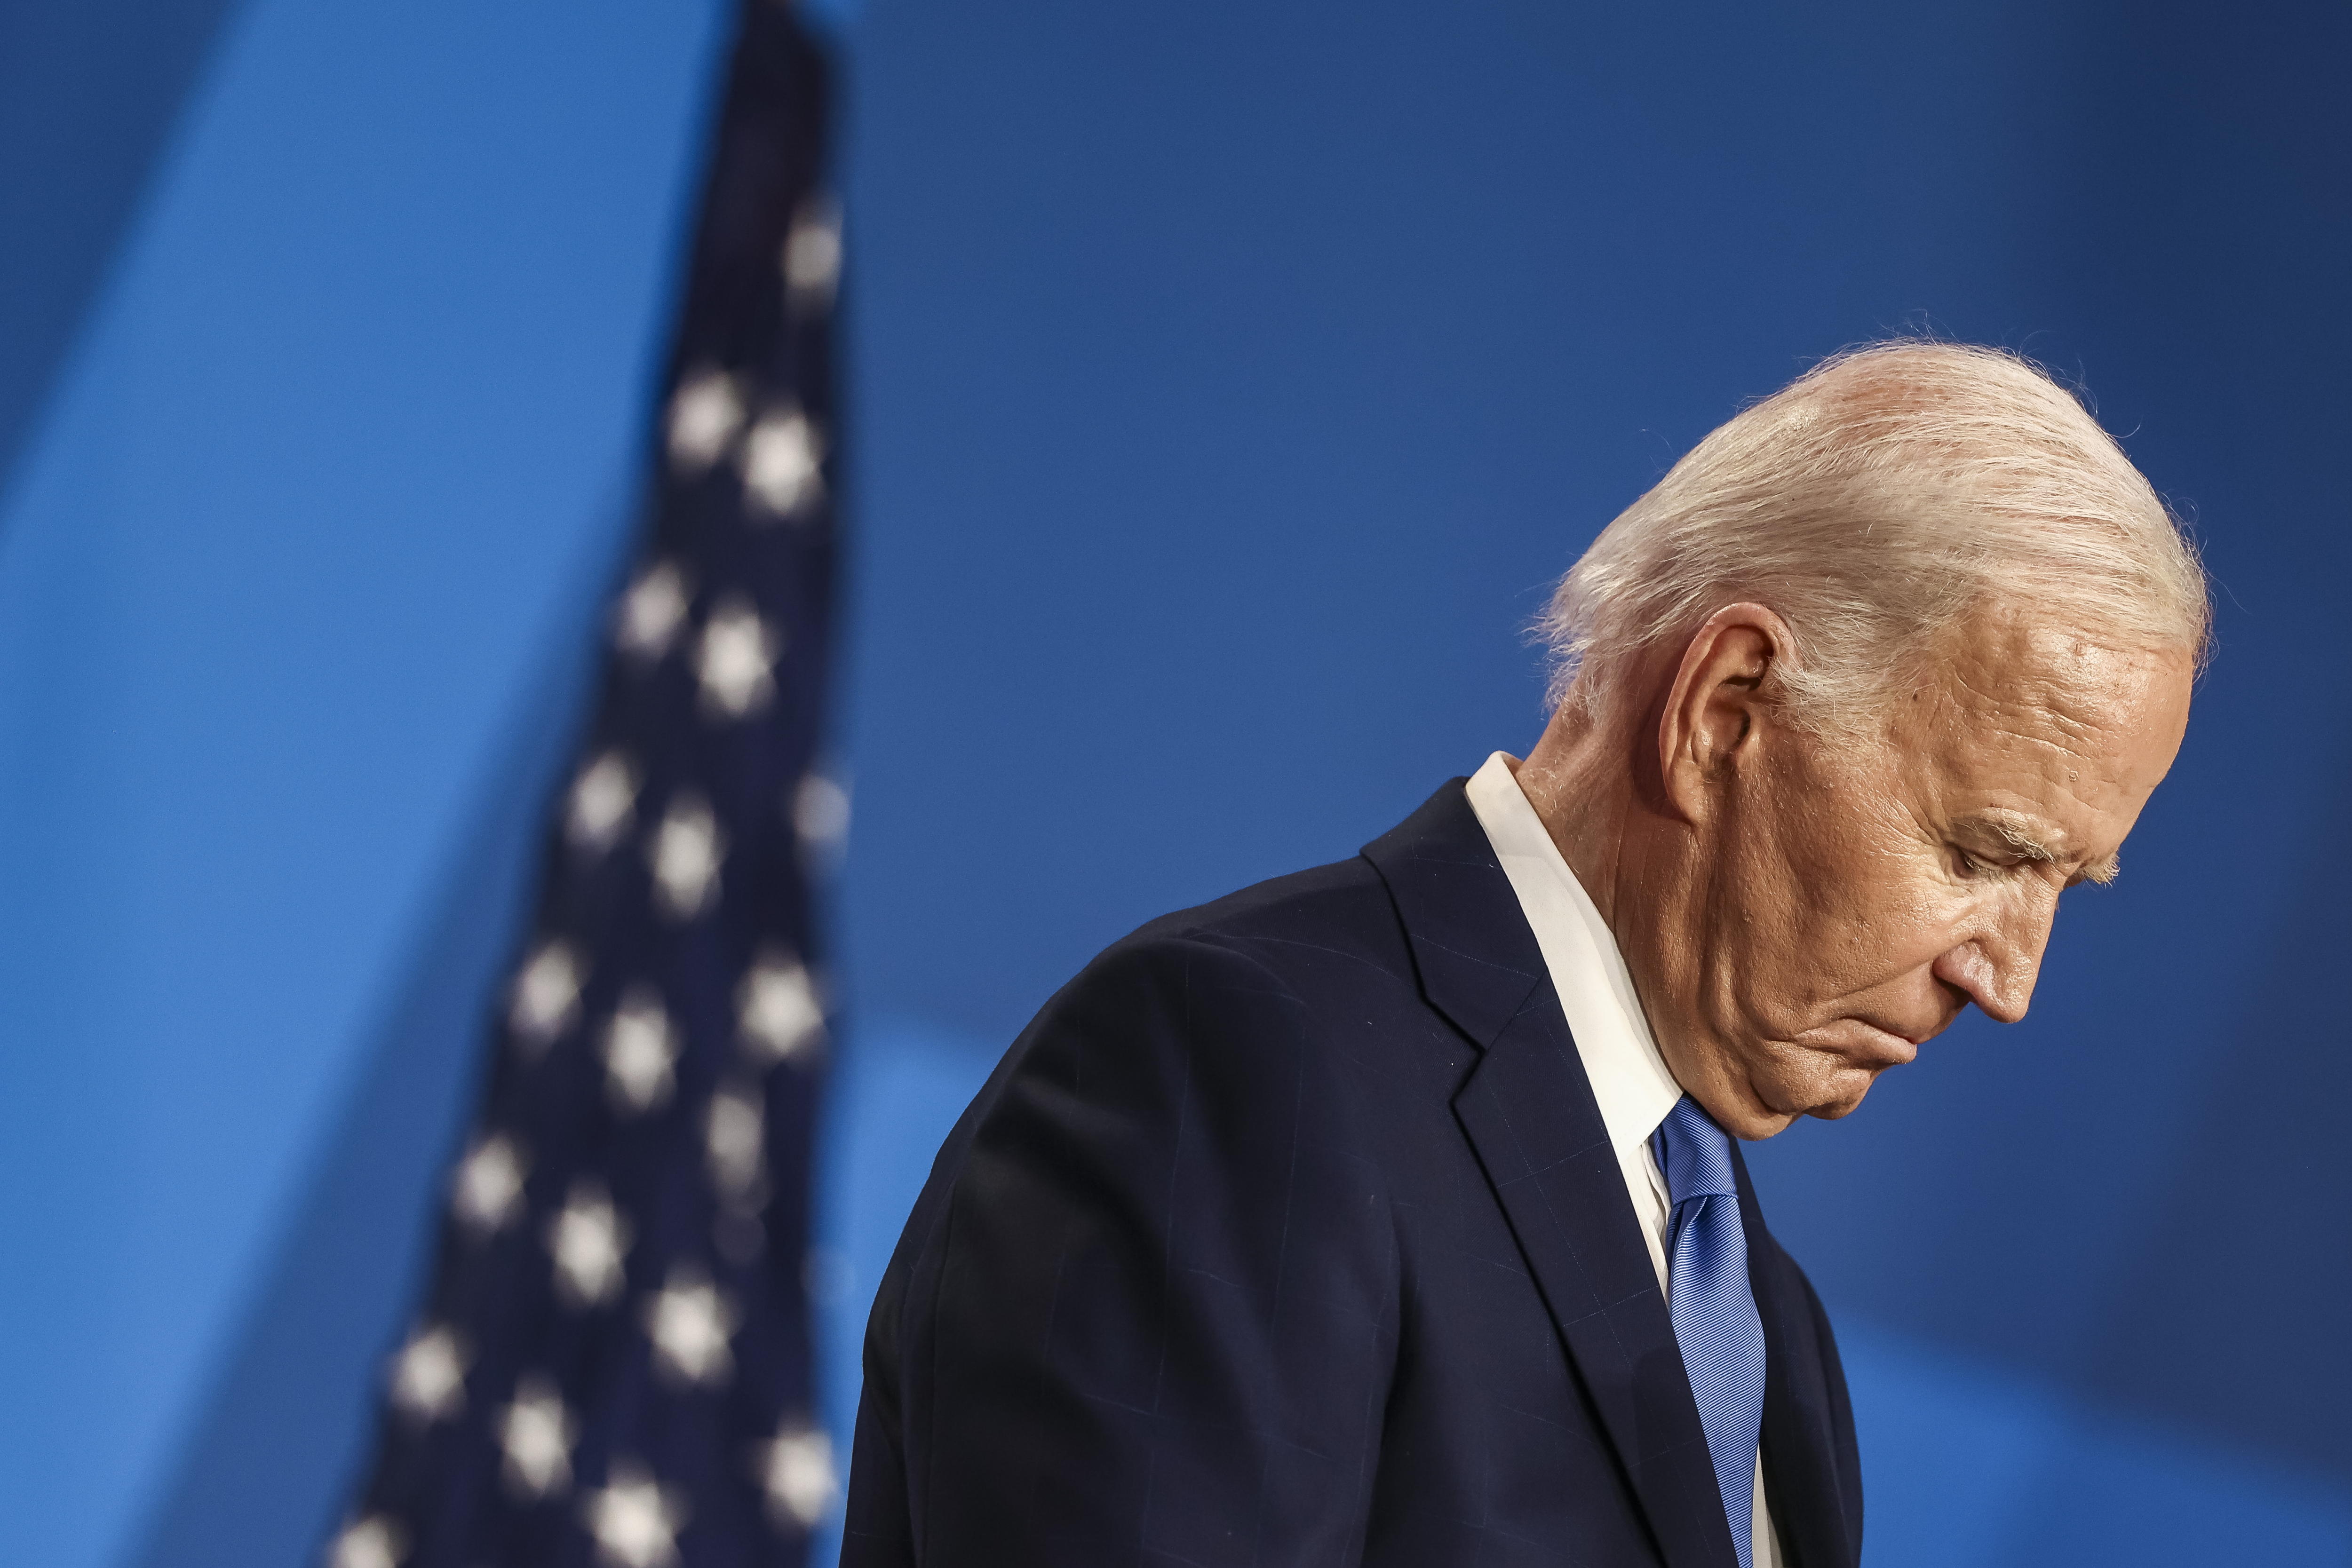 Washington (United States), 11/07/2024.- (FILE) - US President Joe Biden speaks during a press conference on the sidelines of the 75th Anniversary of the North Atlantic Treaty Organization (NATO) Summit at the Walter E. Washington Convention Center in Washington, DC, USA, 10 July 2024 (reissued 21 July 2024). Joe Biden on 21 July announced he would not seek re-election in November 2024. While it has been my intention to seek reelection, I believe it is in the best interest of my party and the country for me to stand down and to focus solely on fulfilling my duties as President for the remainder of my term, Biden announced on his X (formerly Twitter) account. (Elecciones) EFE/EPA/JIM LO SCALZO